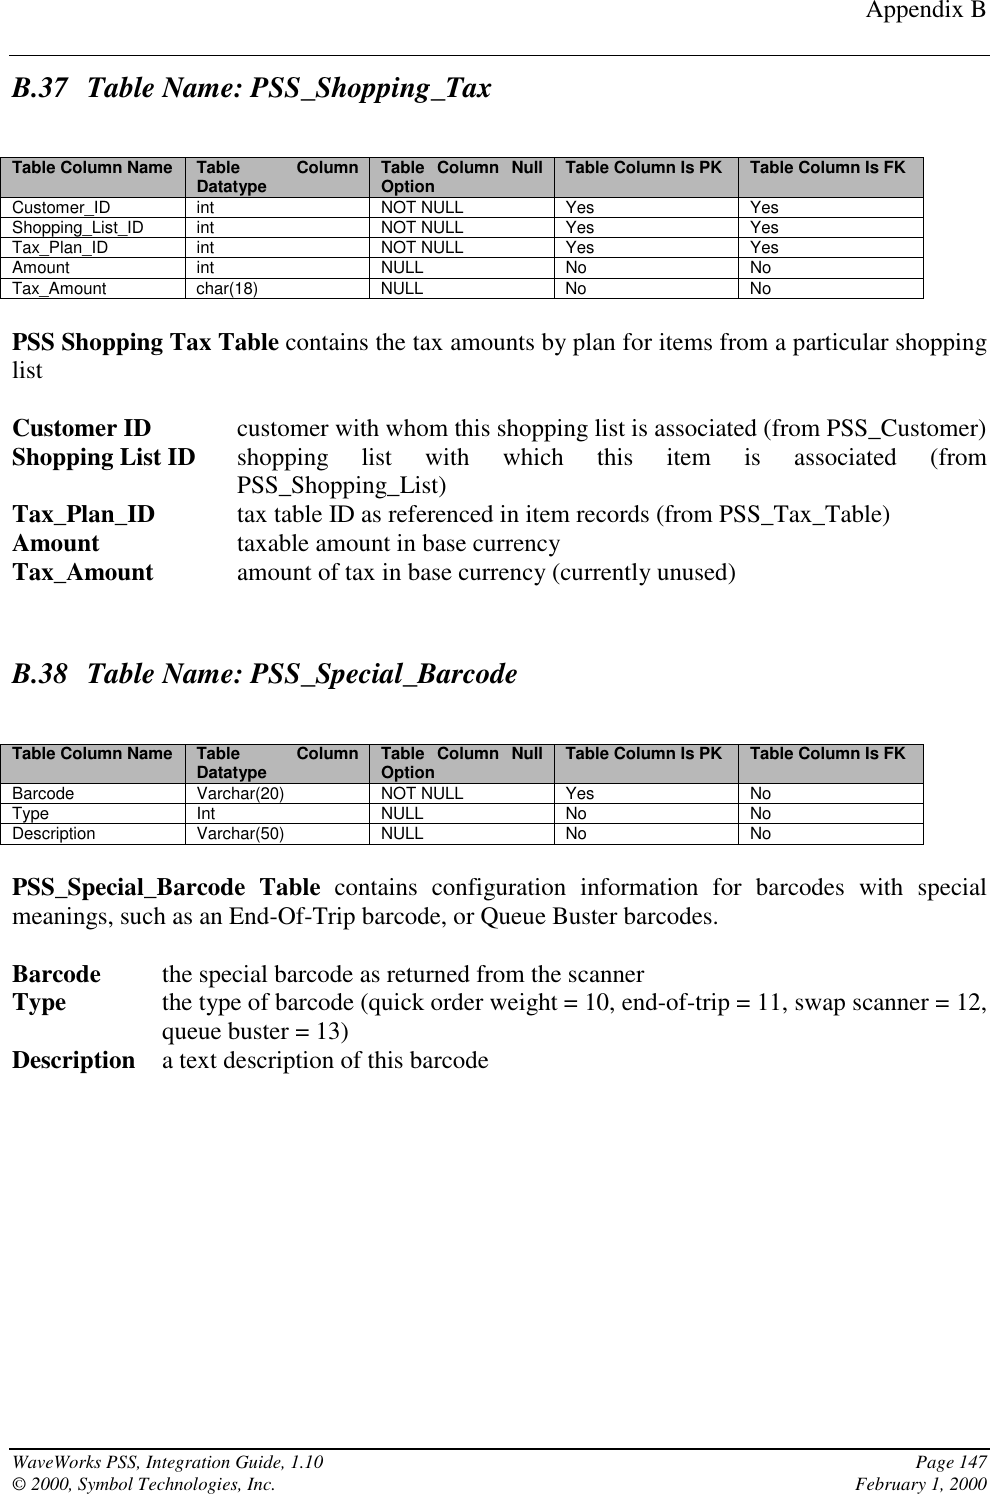 Appendix BWaveWorks PSS, Integration Guide, 1.10 Page 147© 2000, Symbol Technologies, Inc. February 1, 2000B.37 Table Name: PSS_Shopping_TaxTable Column Name Table ColumnDatatype Table Column NullOption Table Column Is PK Table Column Is FKCustomer_ID int NOT NULL Yes YesShopping_List_ID int NOT NULL Yes YesTax_Plan_ID int NOT NULL Yes YesAmount int NULL No NoTax_Amount char(18) NULL No NoPSS Shopping Tax Table contains the tax amounts by plan for items from a particular shoppinglistCustomer ID customer with whom this shopping list is associated (from PSS_Customer)Shopping List ID shopping list with which this item is associated (fromPSS_Shopping_List)Tax_Plan_ID tax table ID as referenced in item records (from PSS_Tax_Table)Amount taxable amount in base currencyTax_Amount amount of tax in base currency (currently unused)B.38 Table Name: PSS_Special_BarcodeTable Column Name Table ColumnDatatype Table Column NullOption Table Column Is PK Table Column Is FKBarcode Varchar(20) NOT NULL Yes NoType Int NULL No NoDescription Varchar(50) NULL No NoPSS_Special_Barcode Table contains configuration information for barcodes with specialmeanings, such as an End-Of-Trip barcode, or Queue Buster barcodes.Barcode the special barcode as returned from the scanner            Type the type of barcode (quick order weight = 10, end-of-trip = 11, swap scanner = 12,queue buster = 13)Description a text description of this barcode